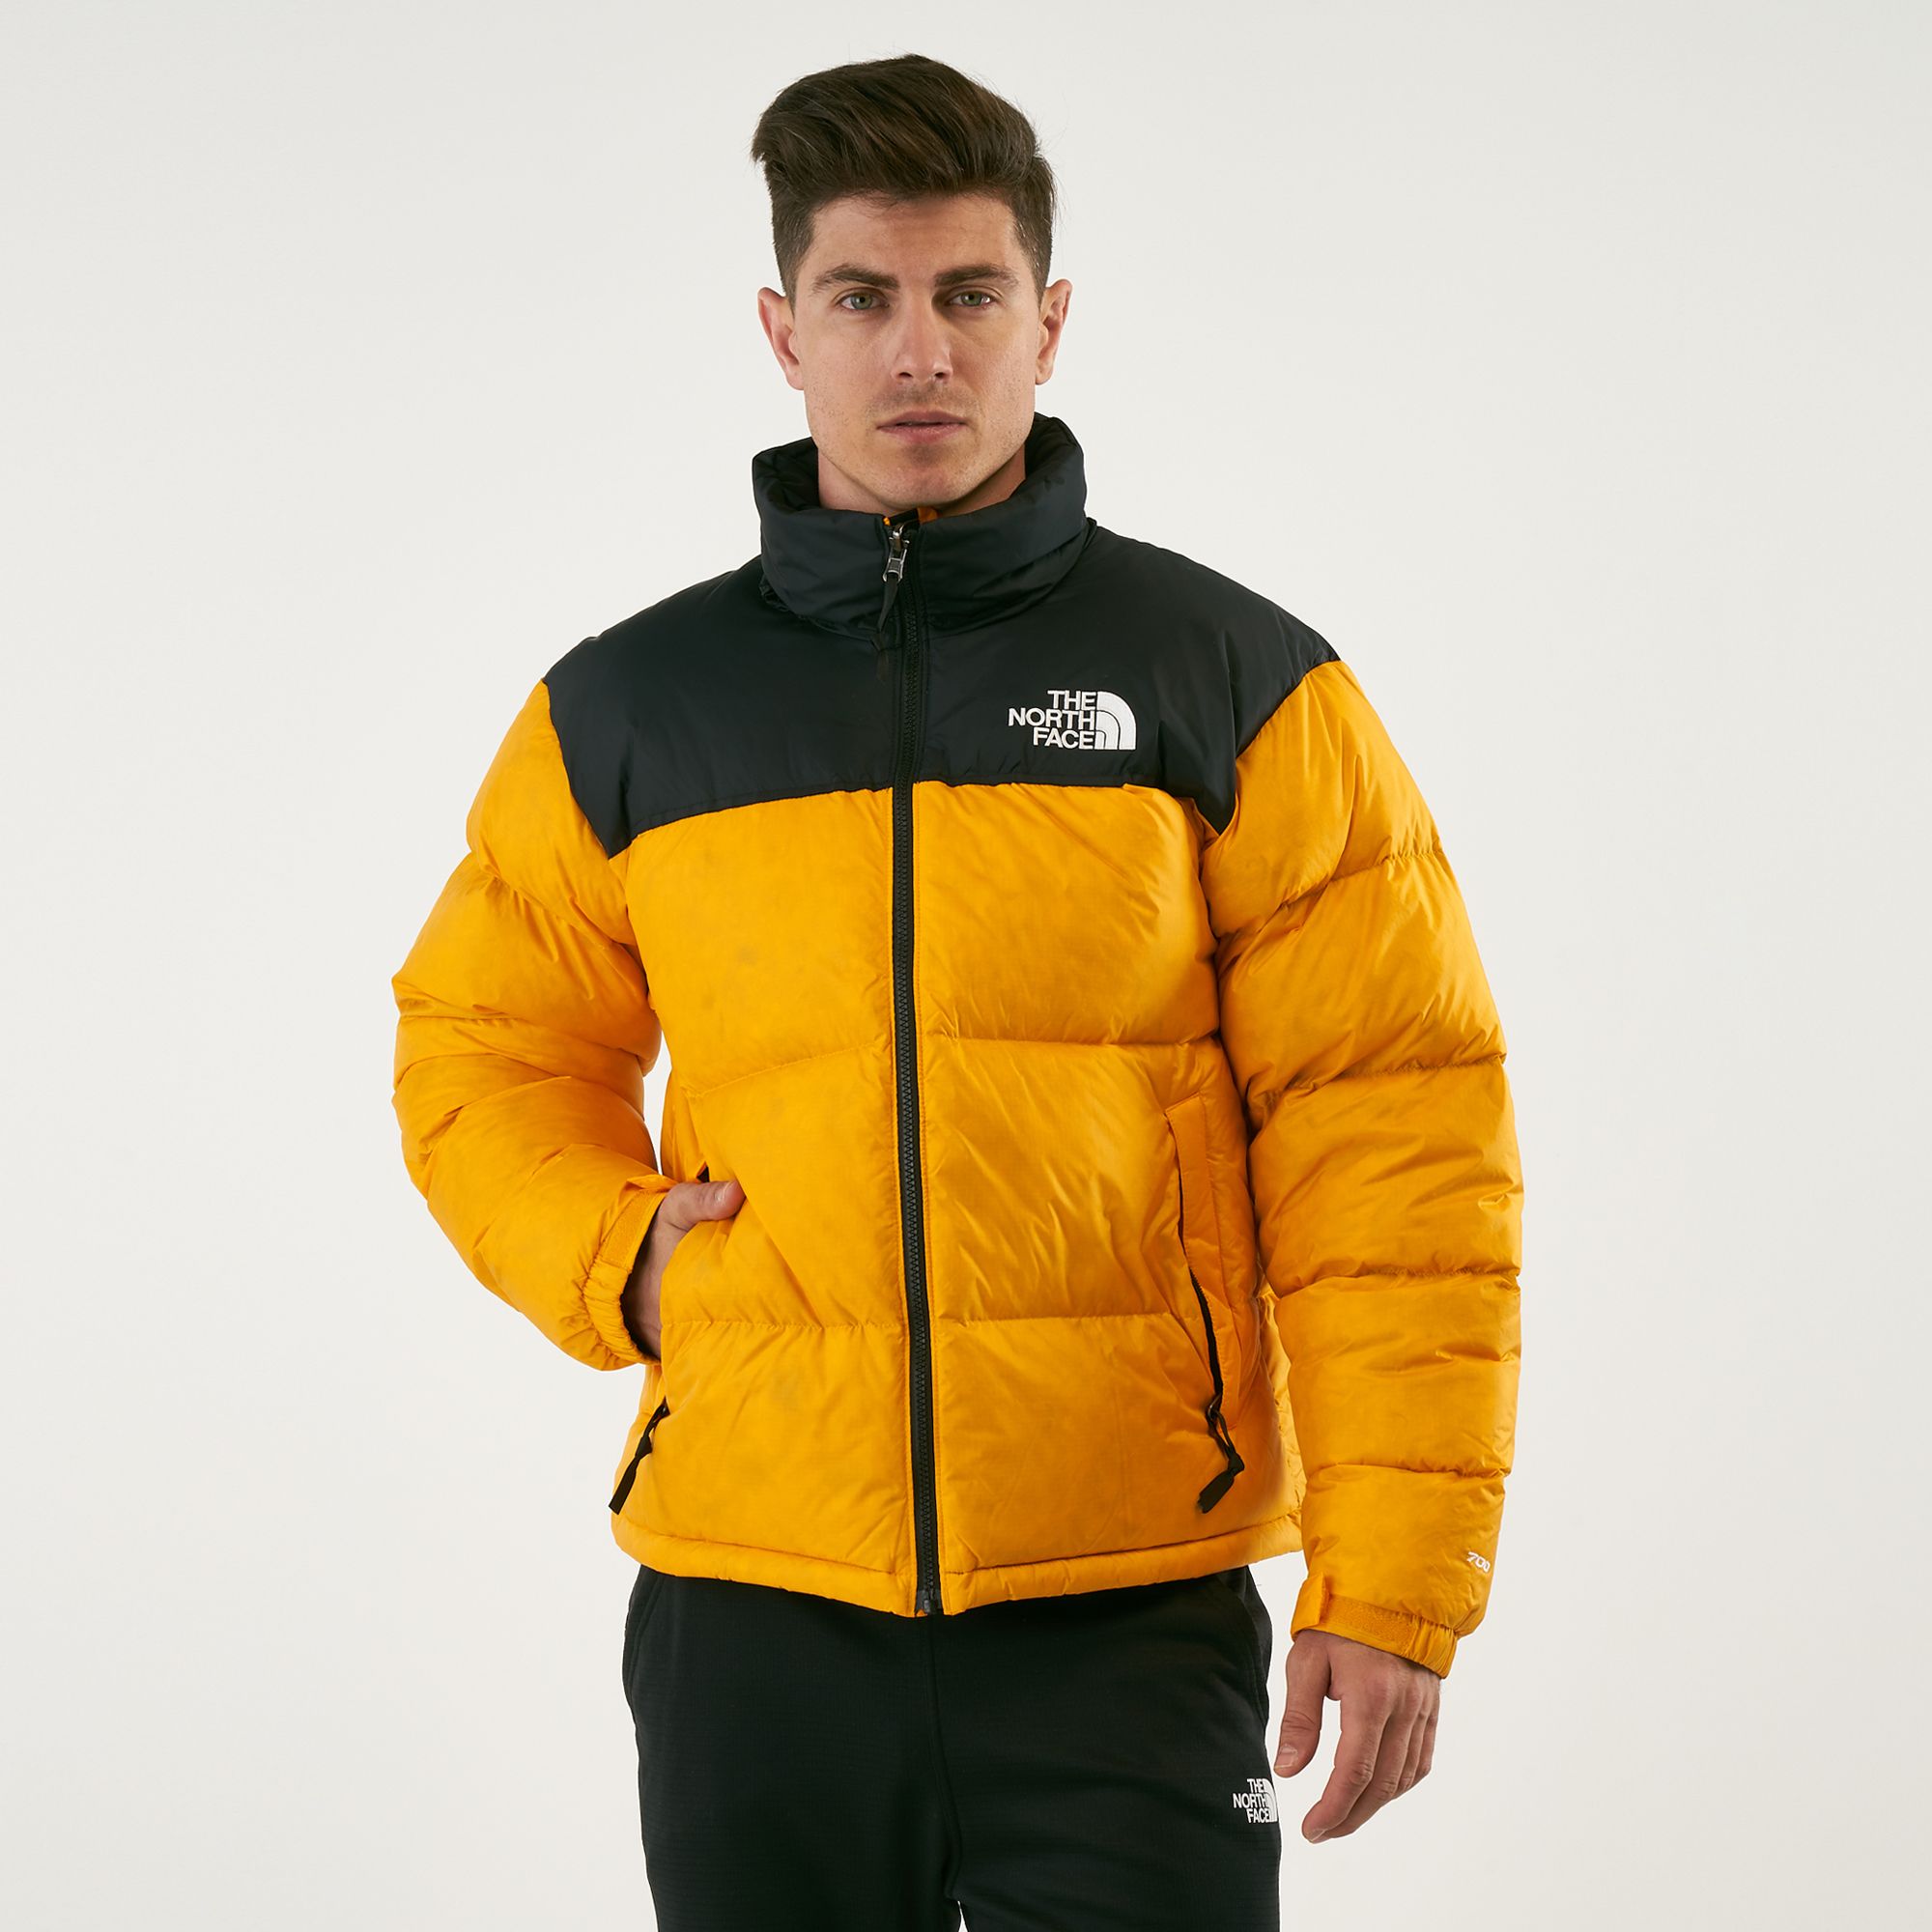 the north face jacket mens sale Online 